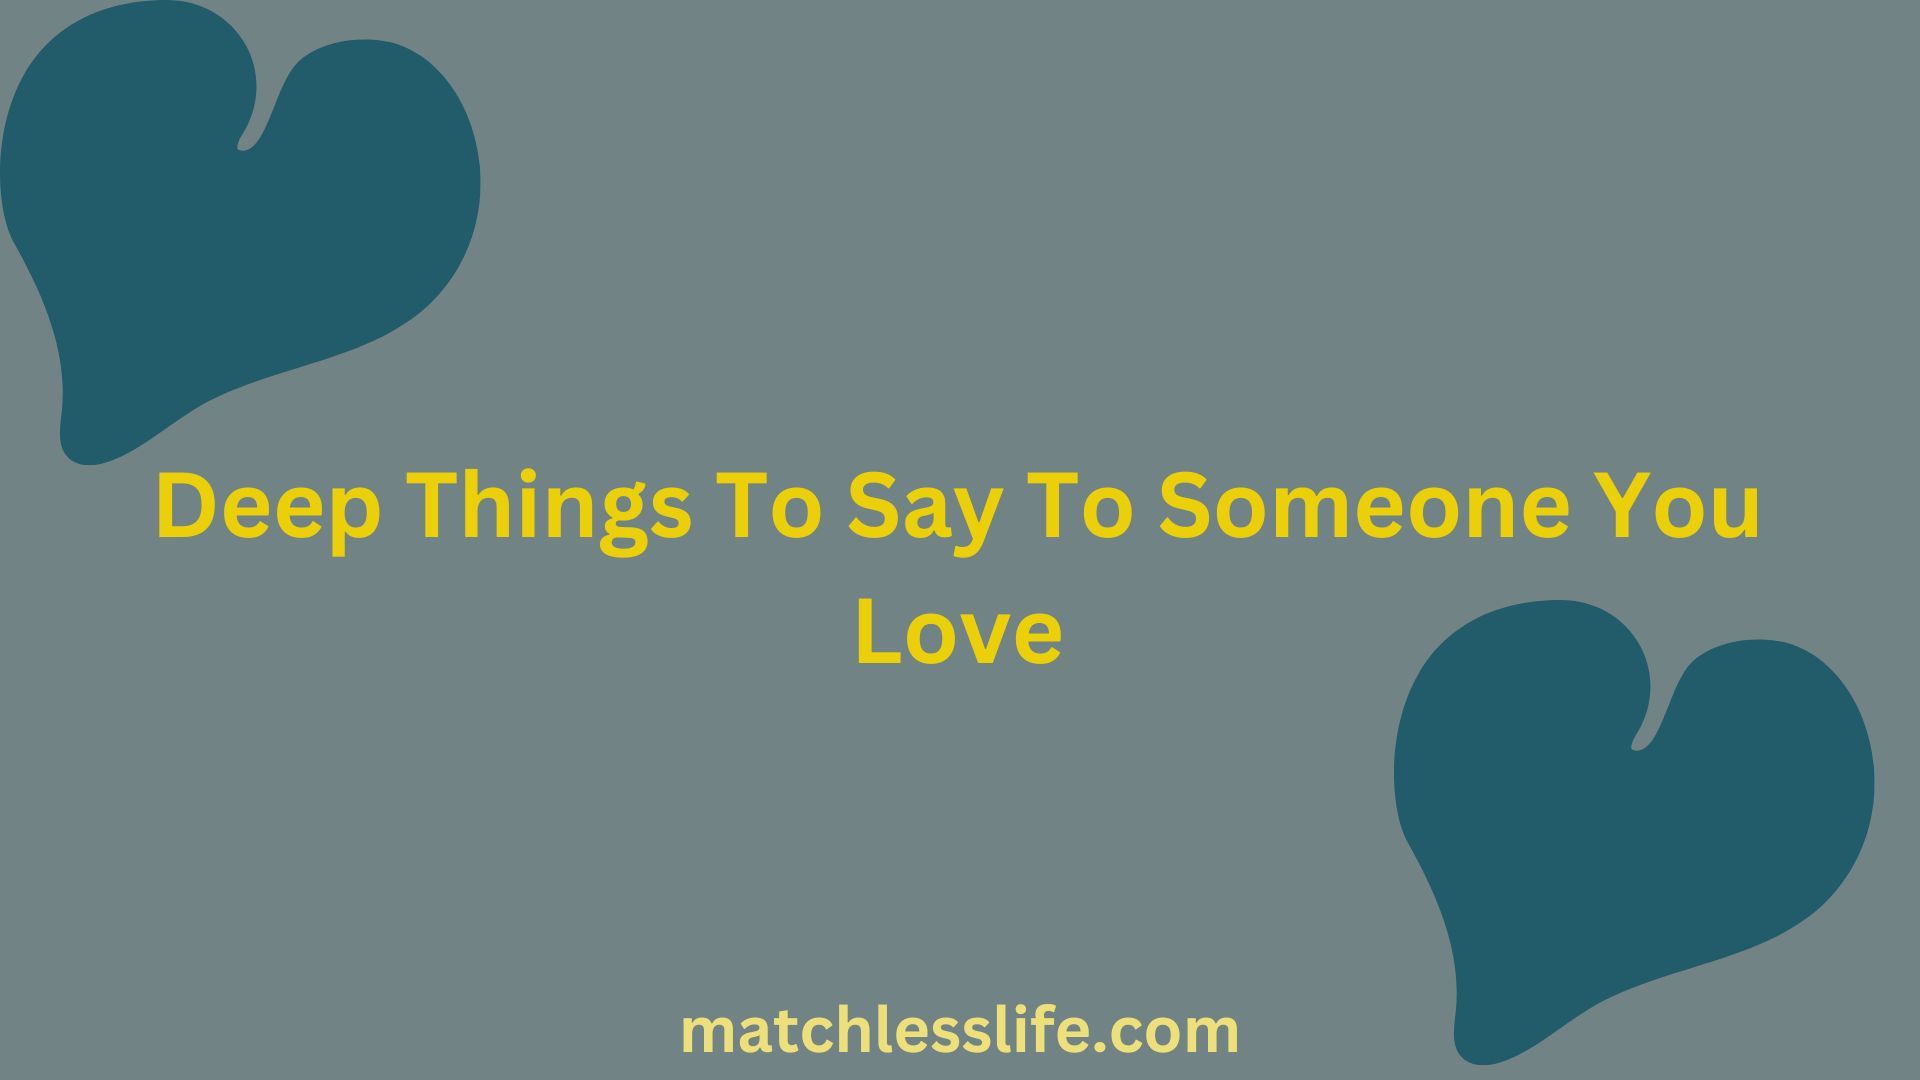 Deep Things To Say To Someone You Love